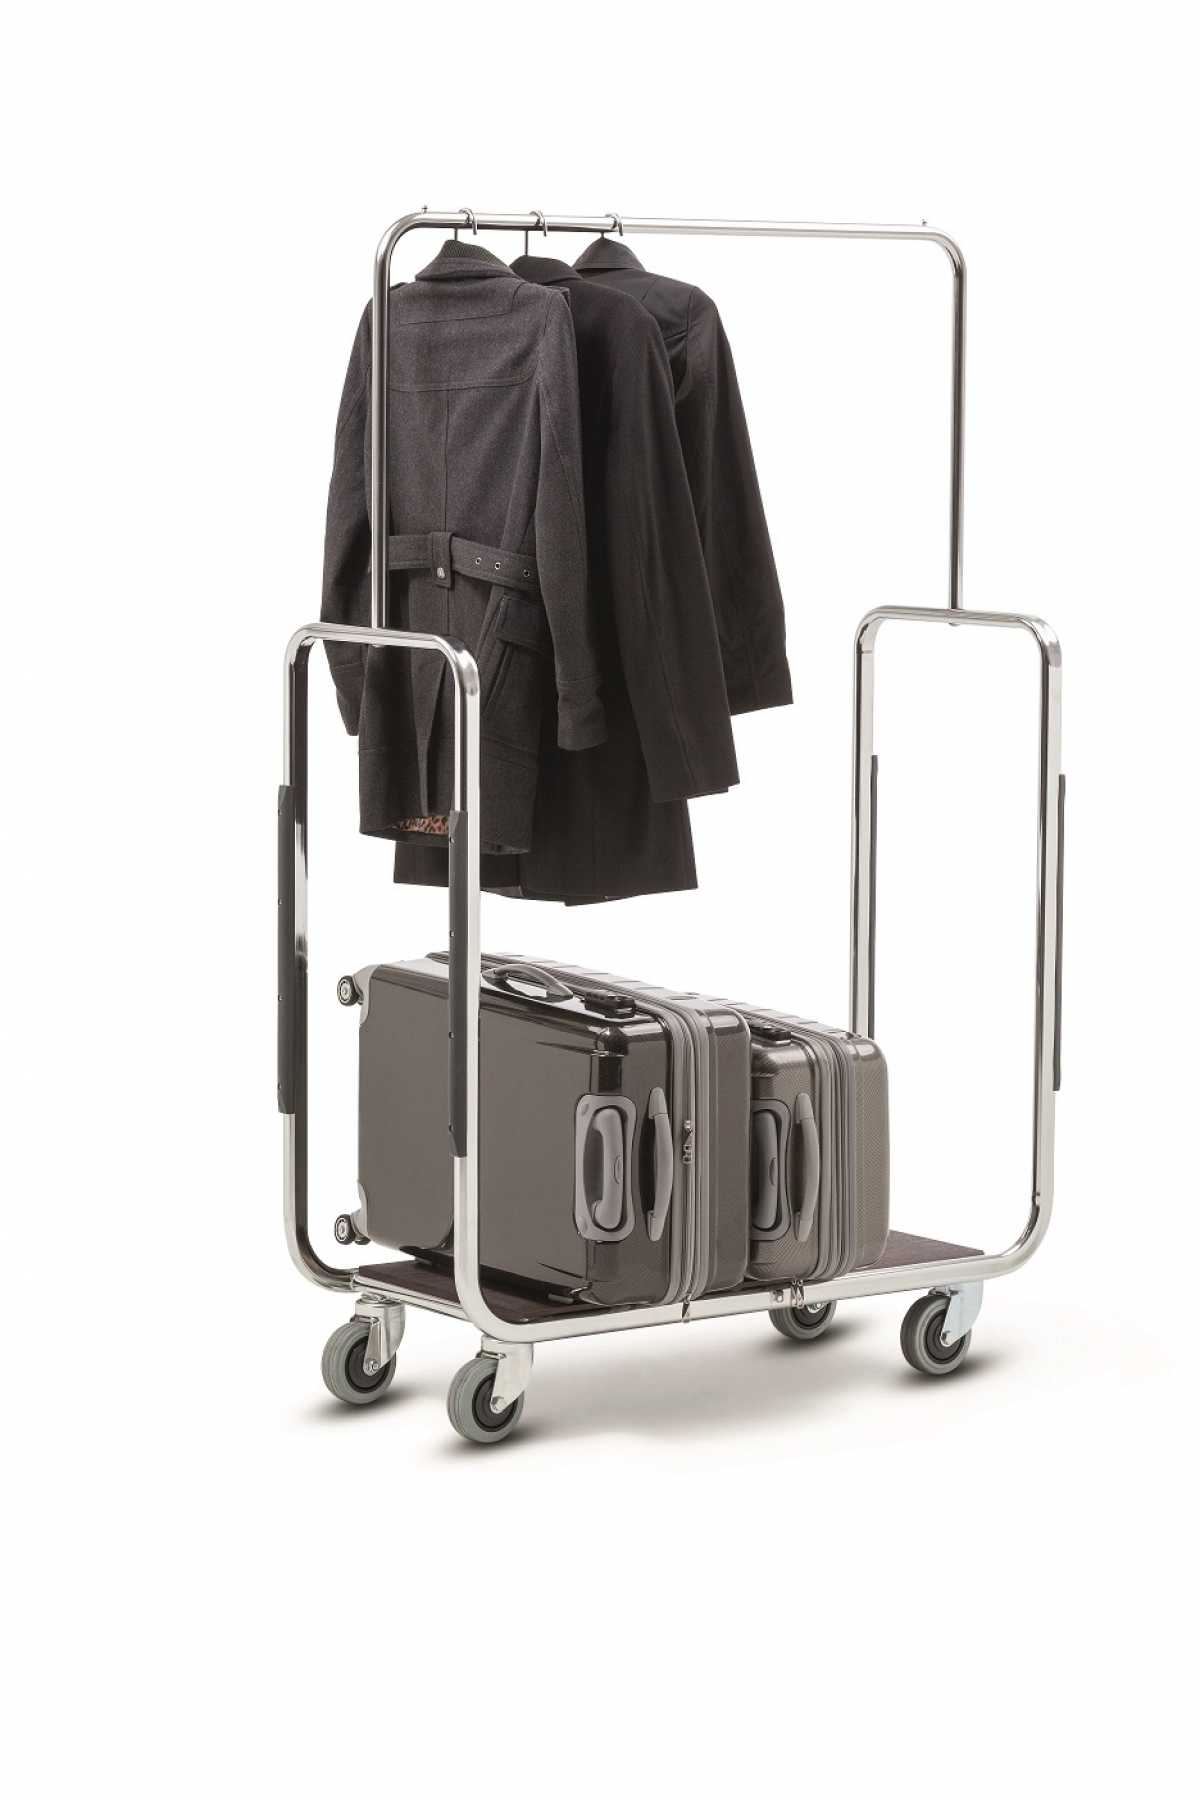 WANZL Luggage Collection Trolley GS-Group